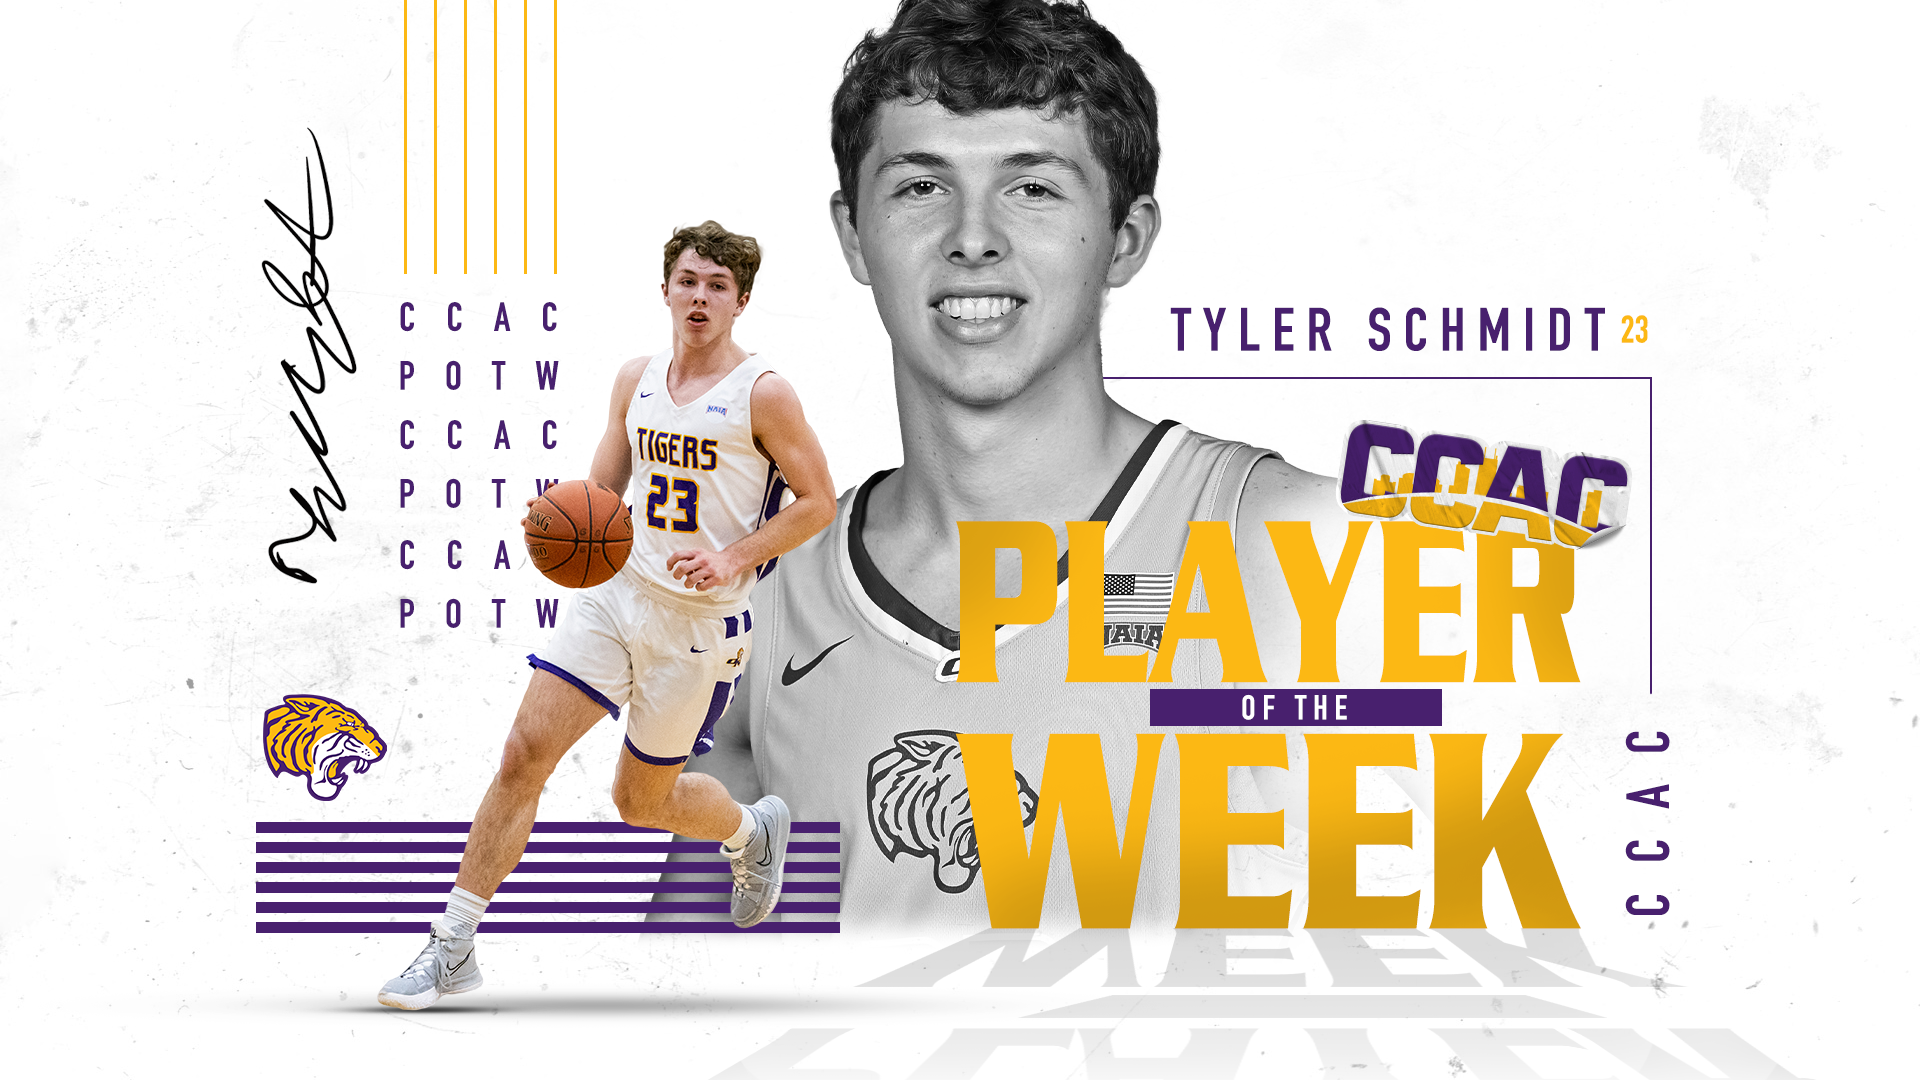 SCHMIDT EARNS OPENING CCAC PLAYER OF THE WEEK HONORS